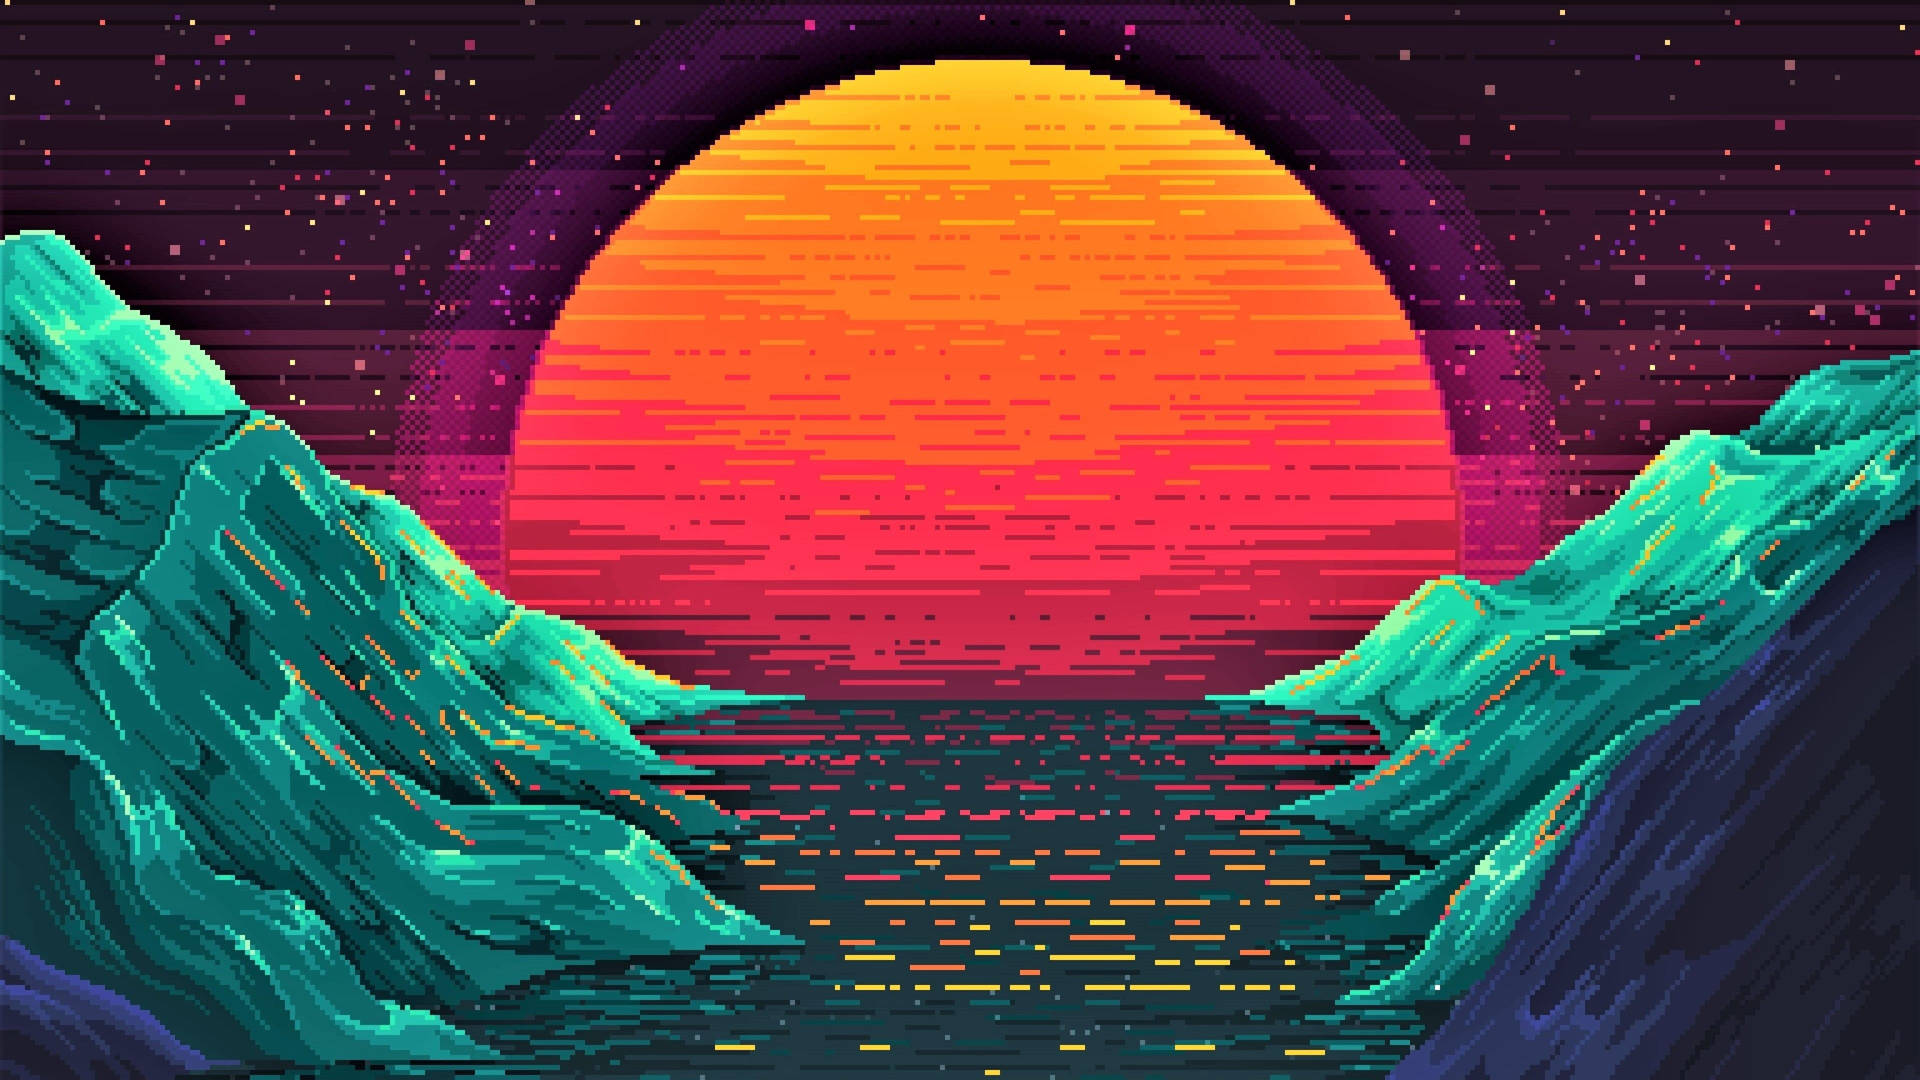 Enjoying The Breathtaking View Of A Pixelized Sunset